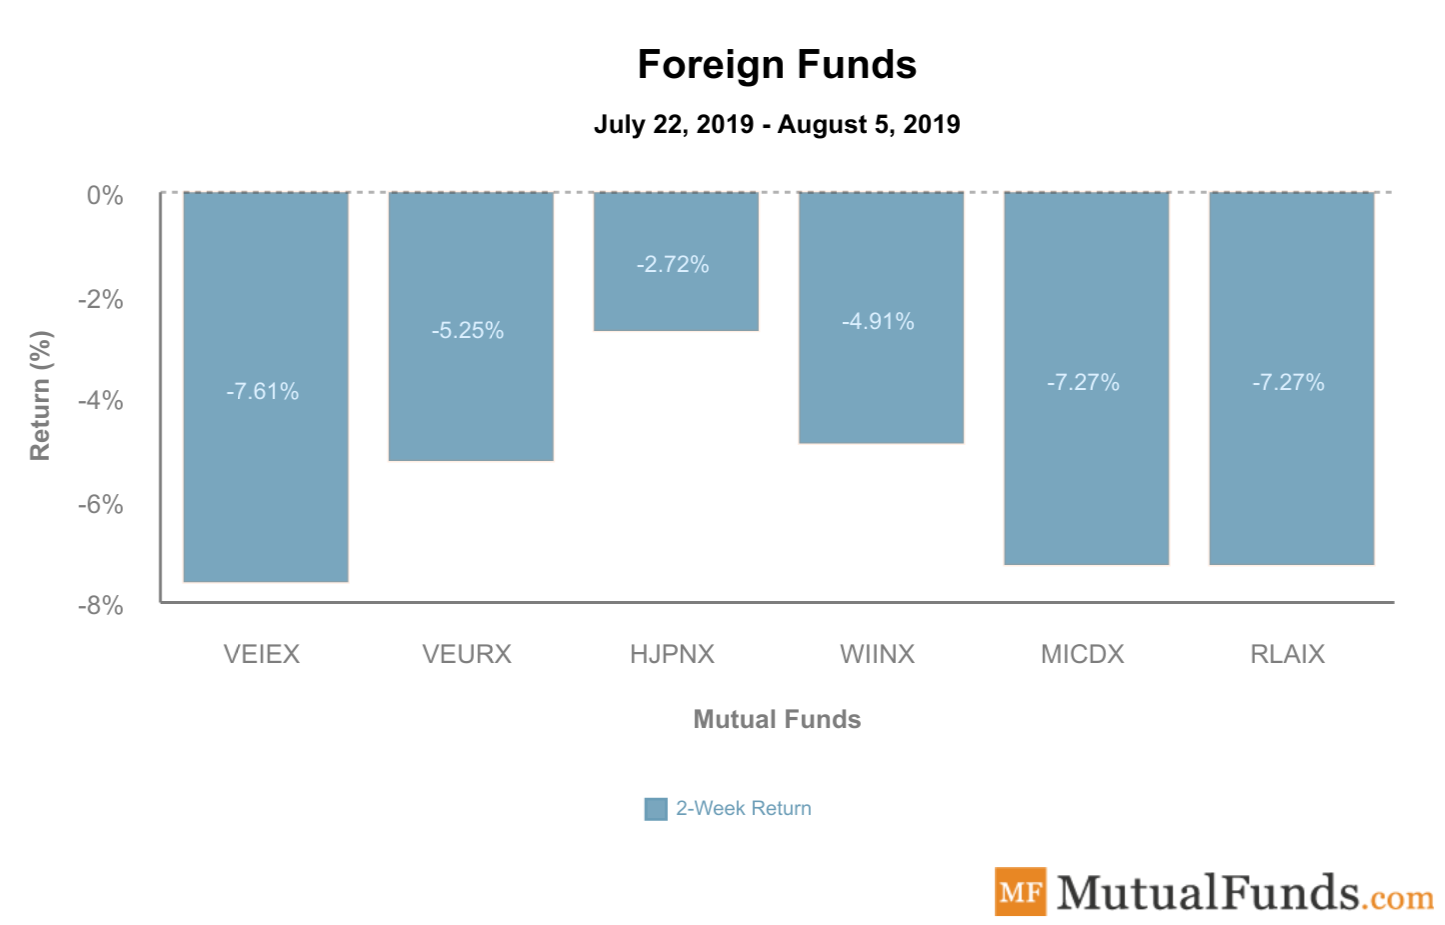 Foreign Funds August 9 2019